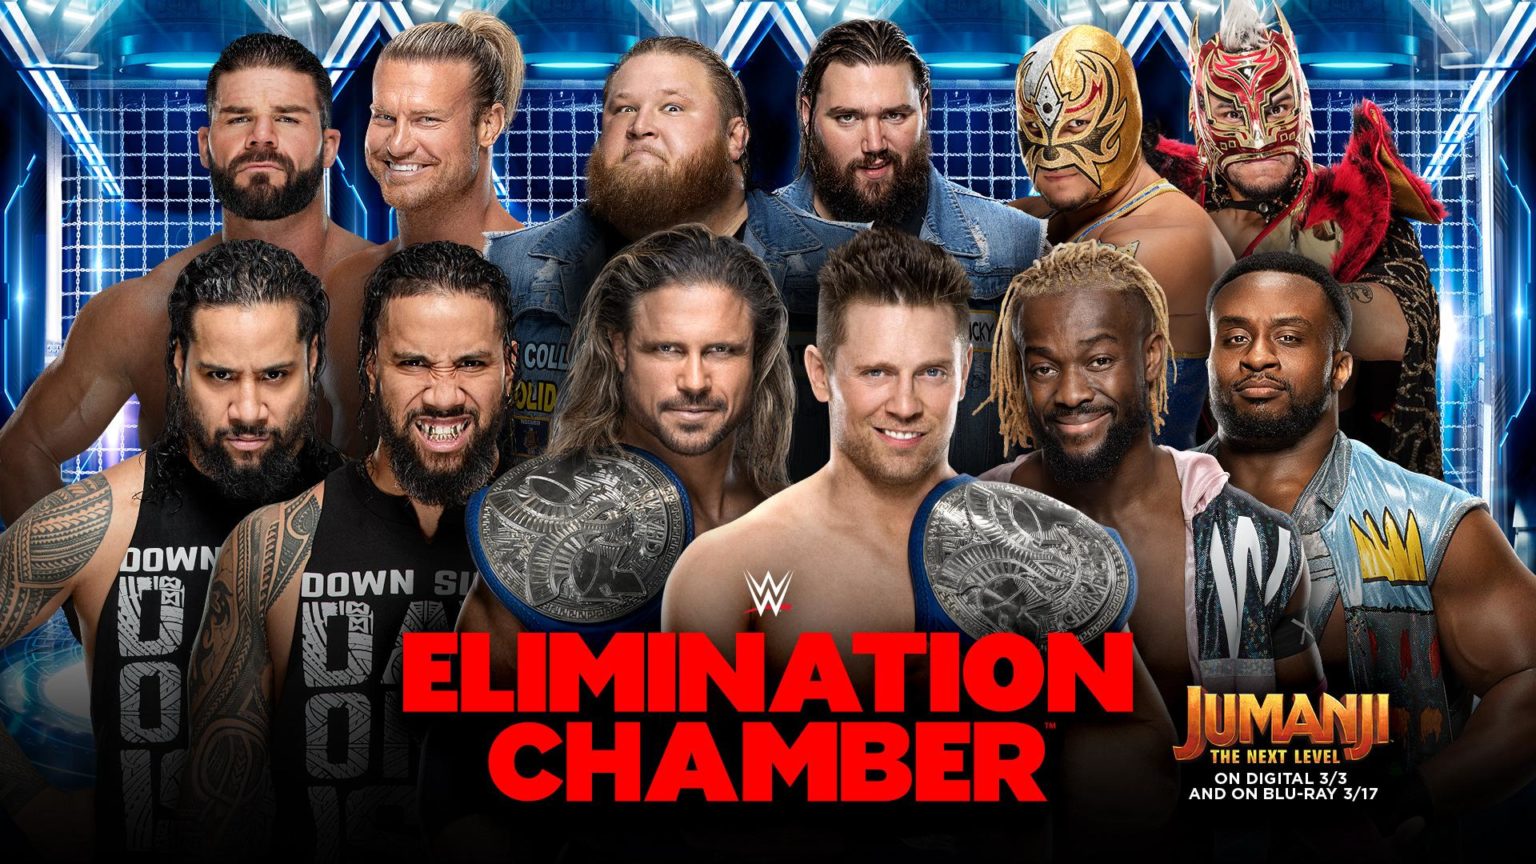 WWE Elimination Chamber 2020 Review and Match Ratings